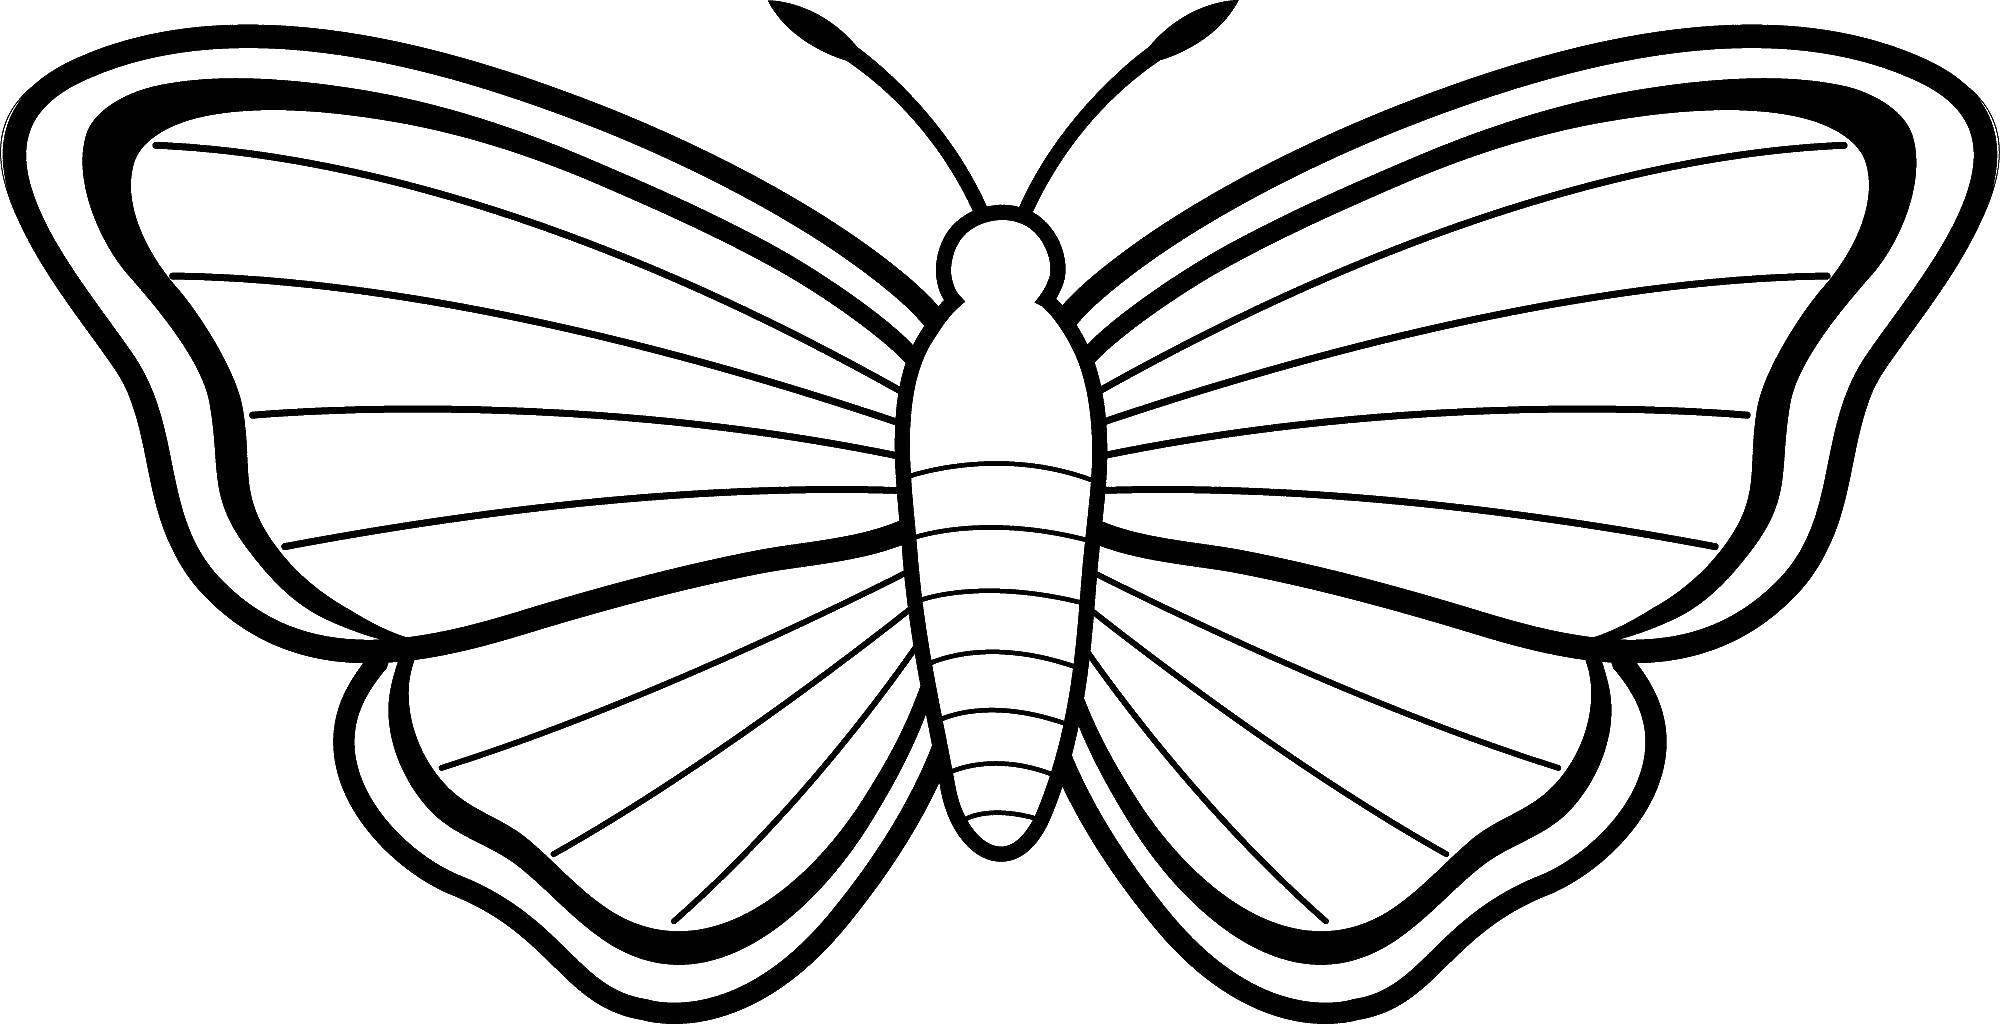 Coloring Butterfly. Category Butterfly. Tags:  butterflies, butterfly, lines.